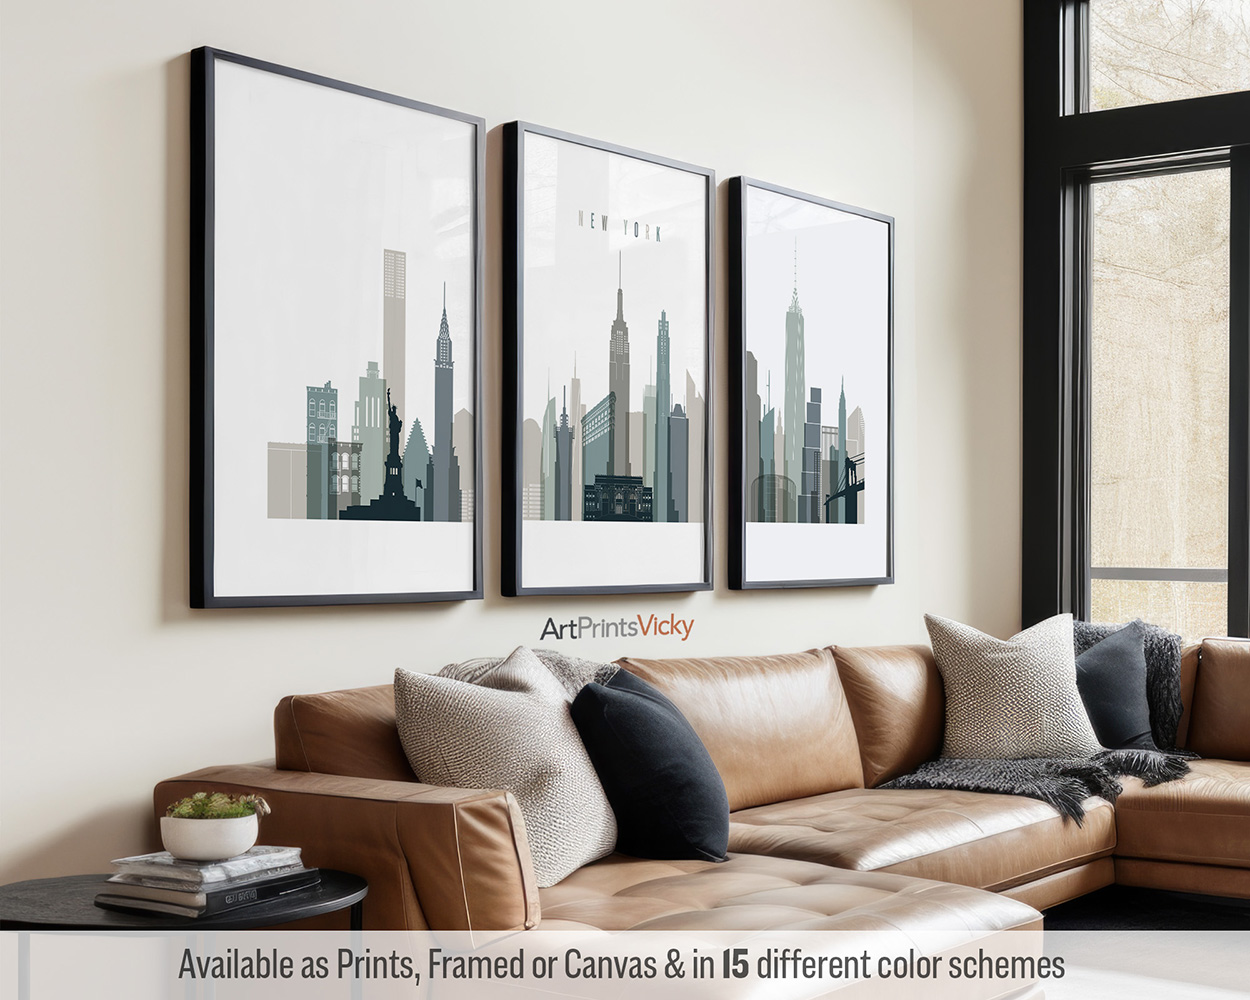 New York Set of 3 Prints in Cool Earth Colors by ArtPrintsVicky